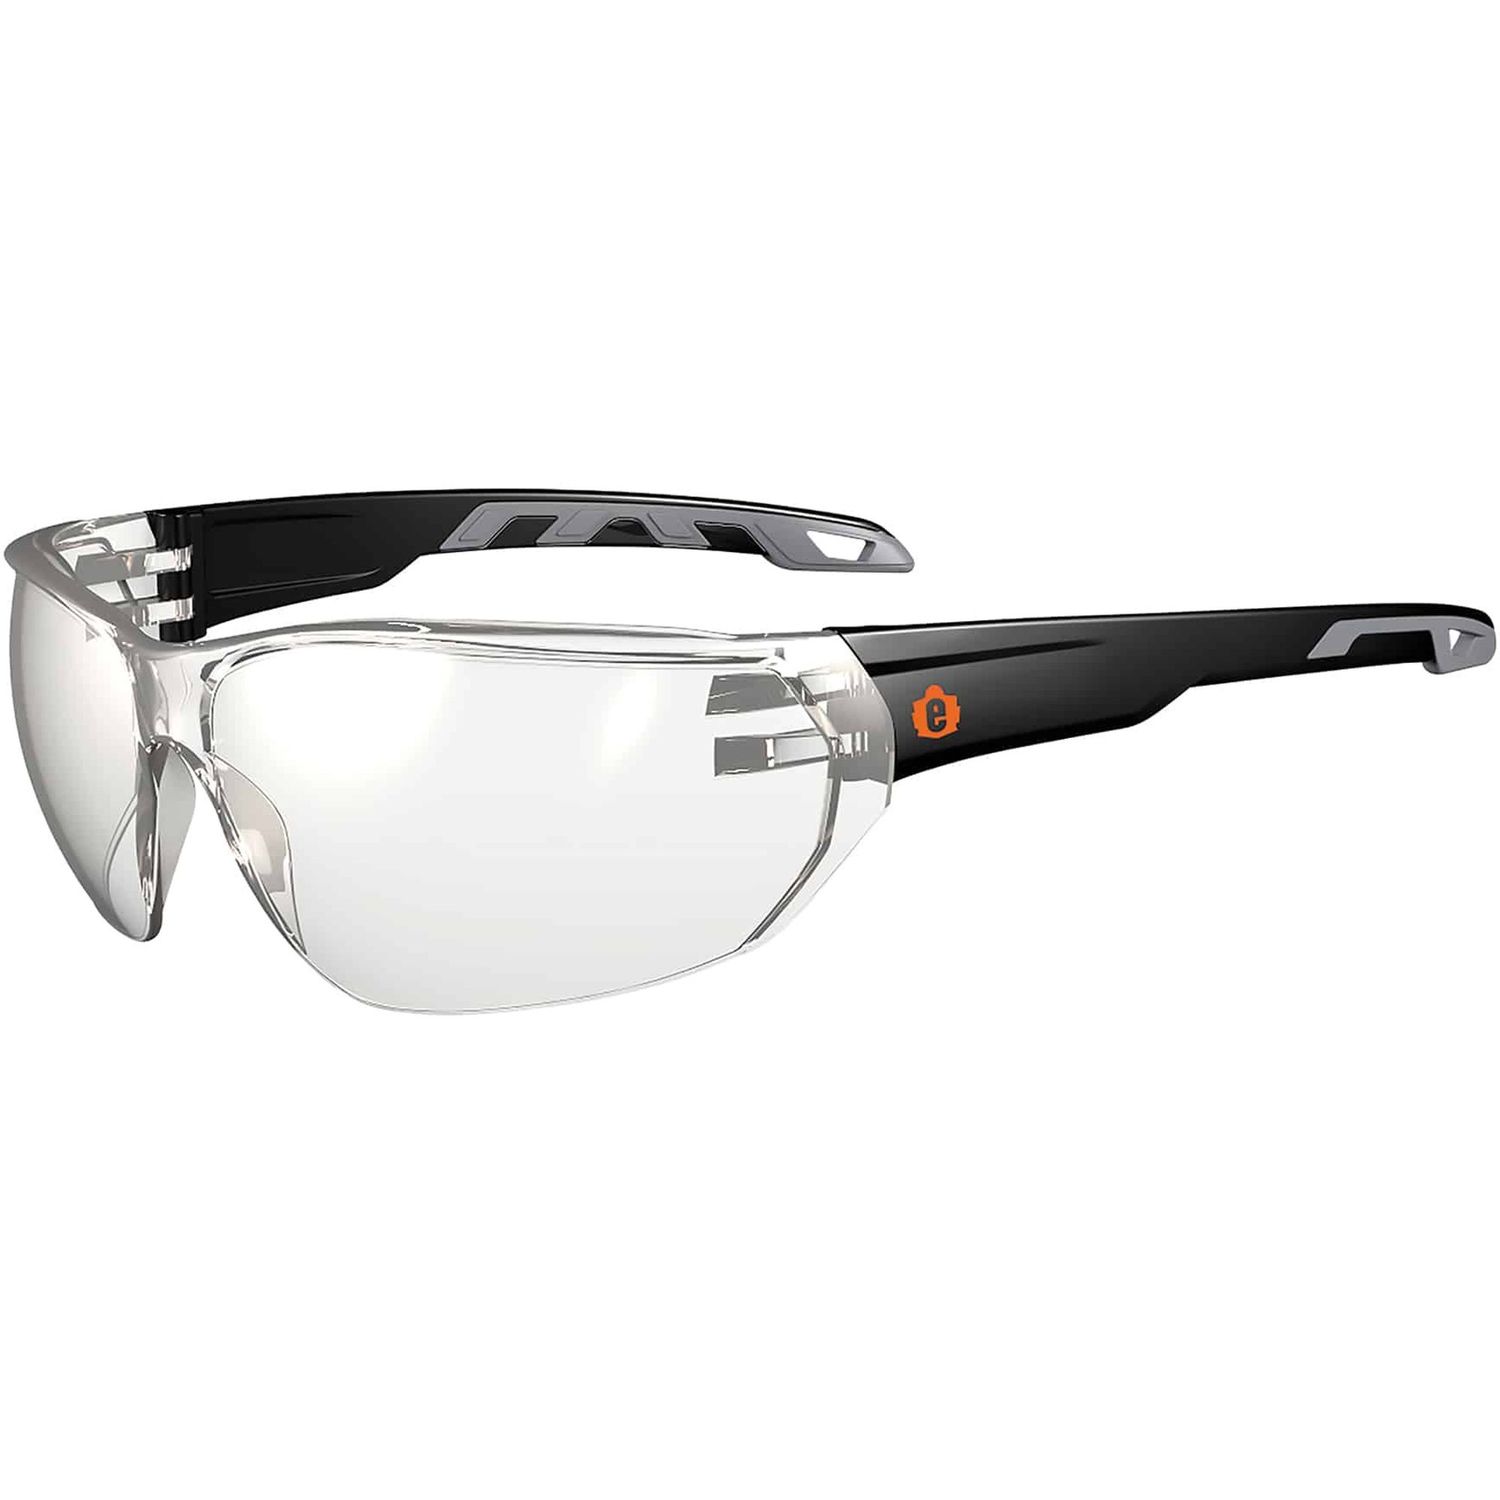 VALI In/Outdoor Lens Matte Frameless Safety Glasses / Sunglasses Recommended for: Indoor/Outdoor